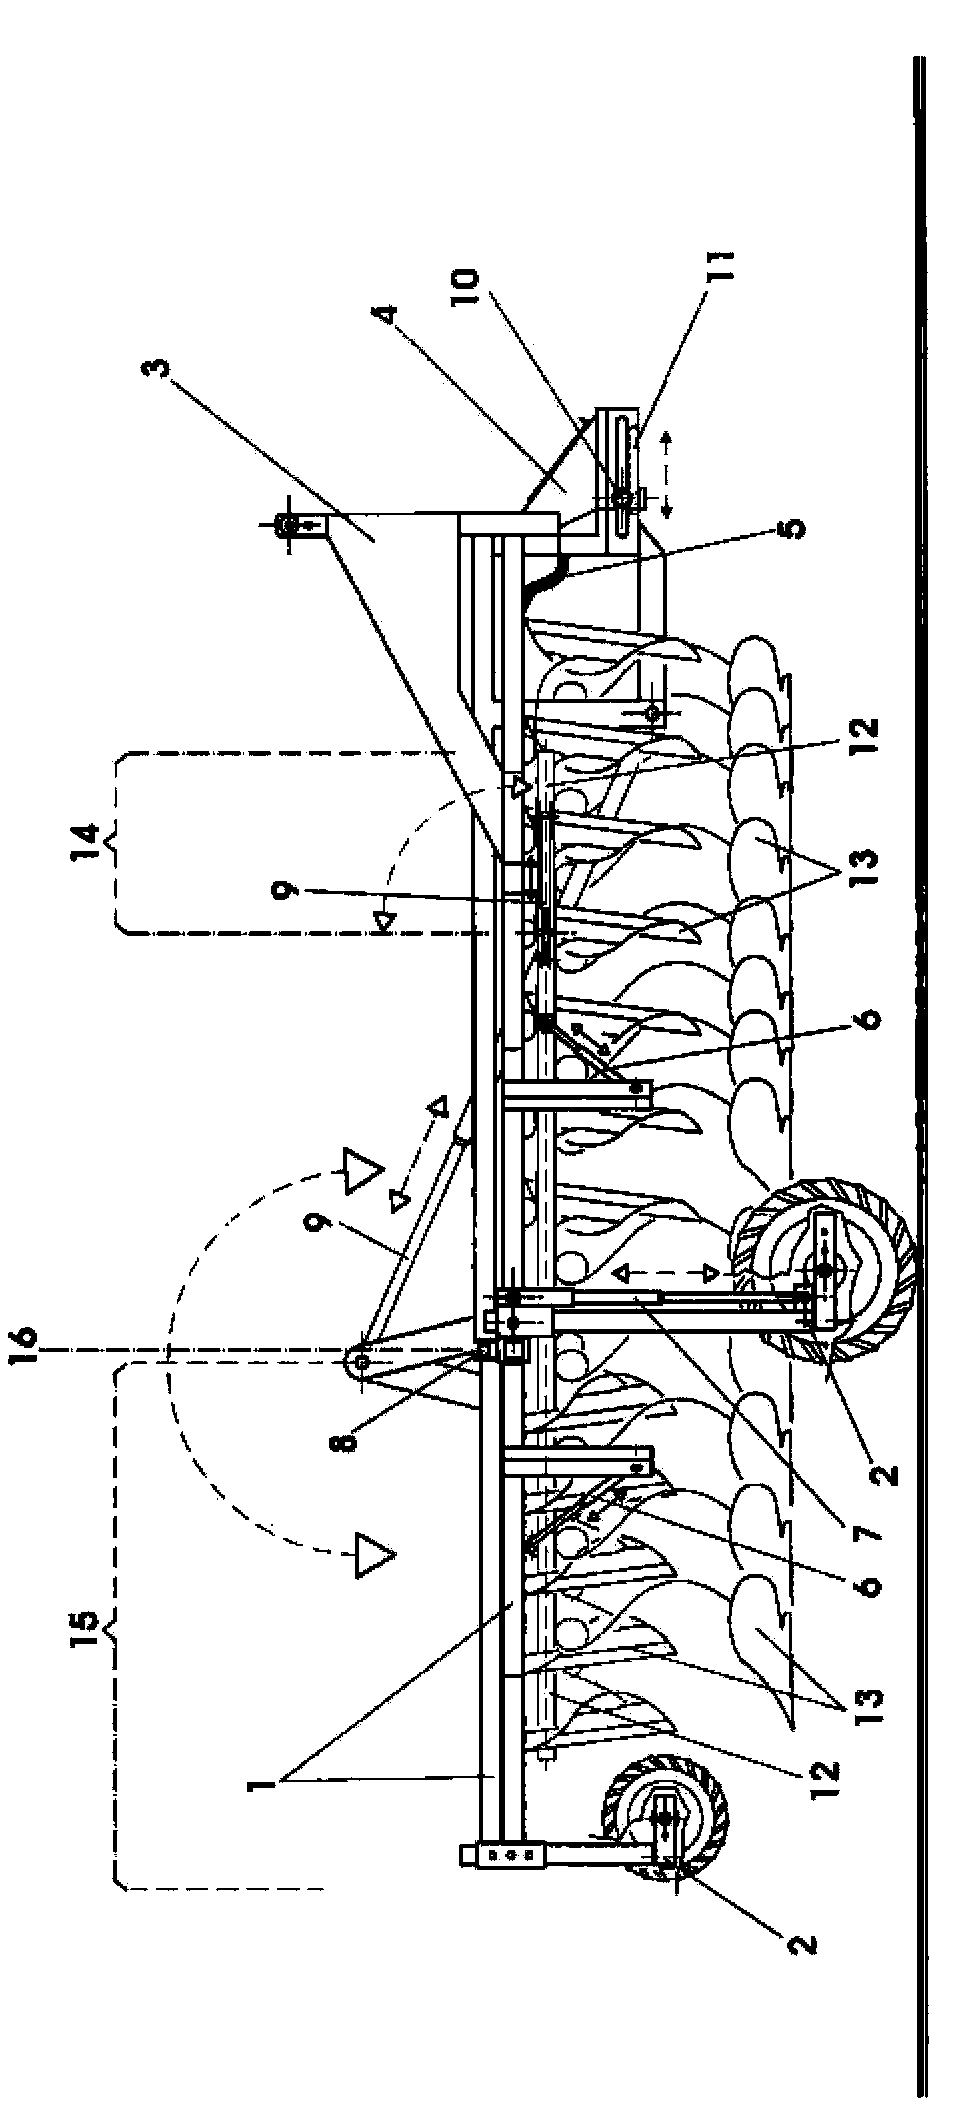 Hydraulic plough actuated by the thrust from a towing vehicle